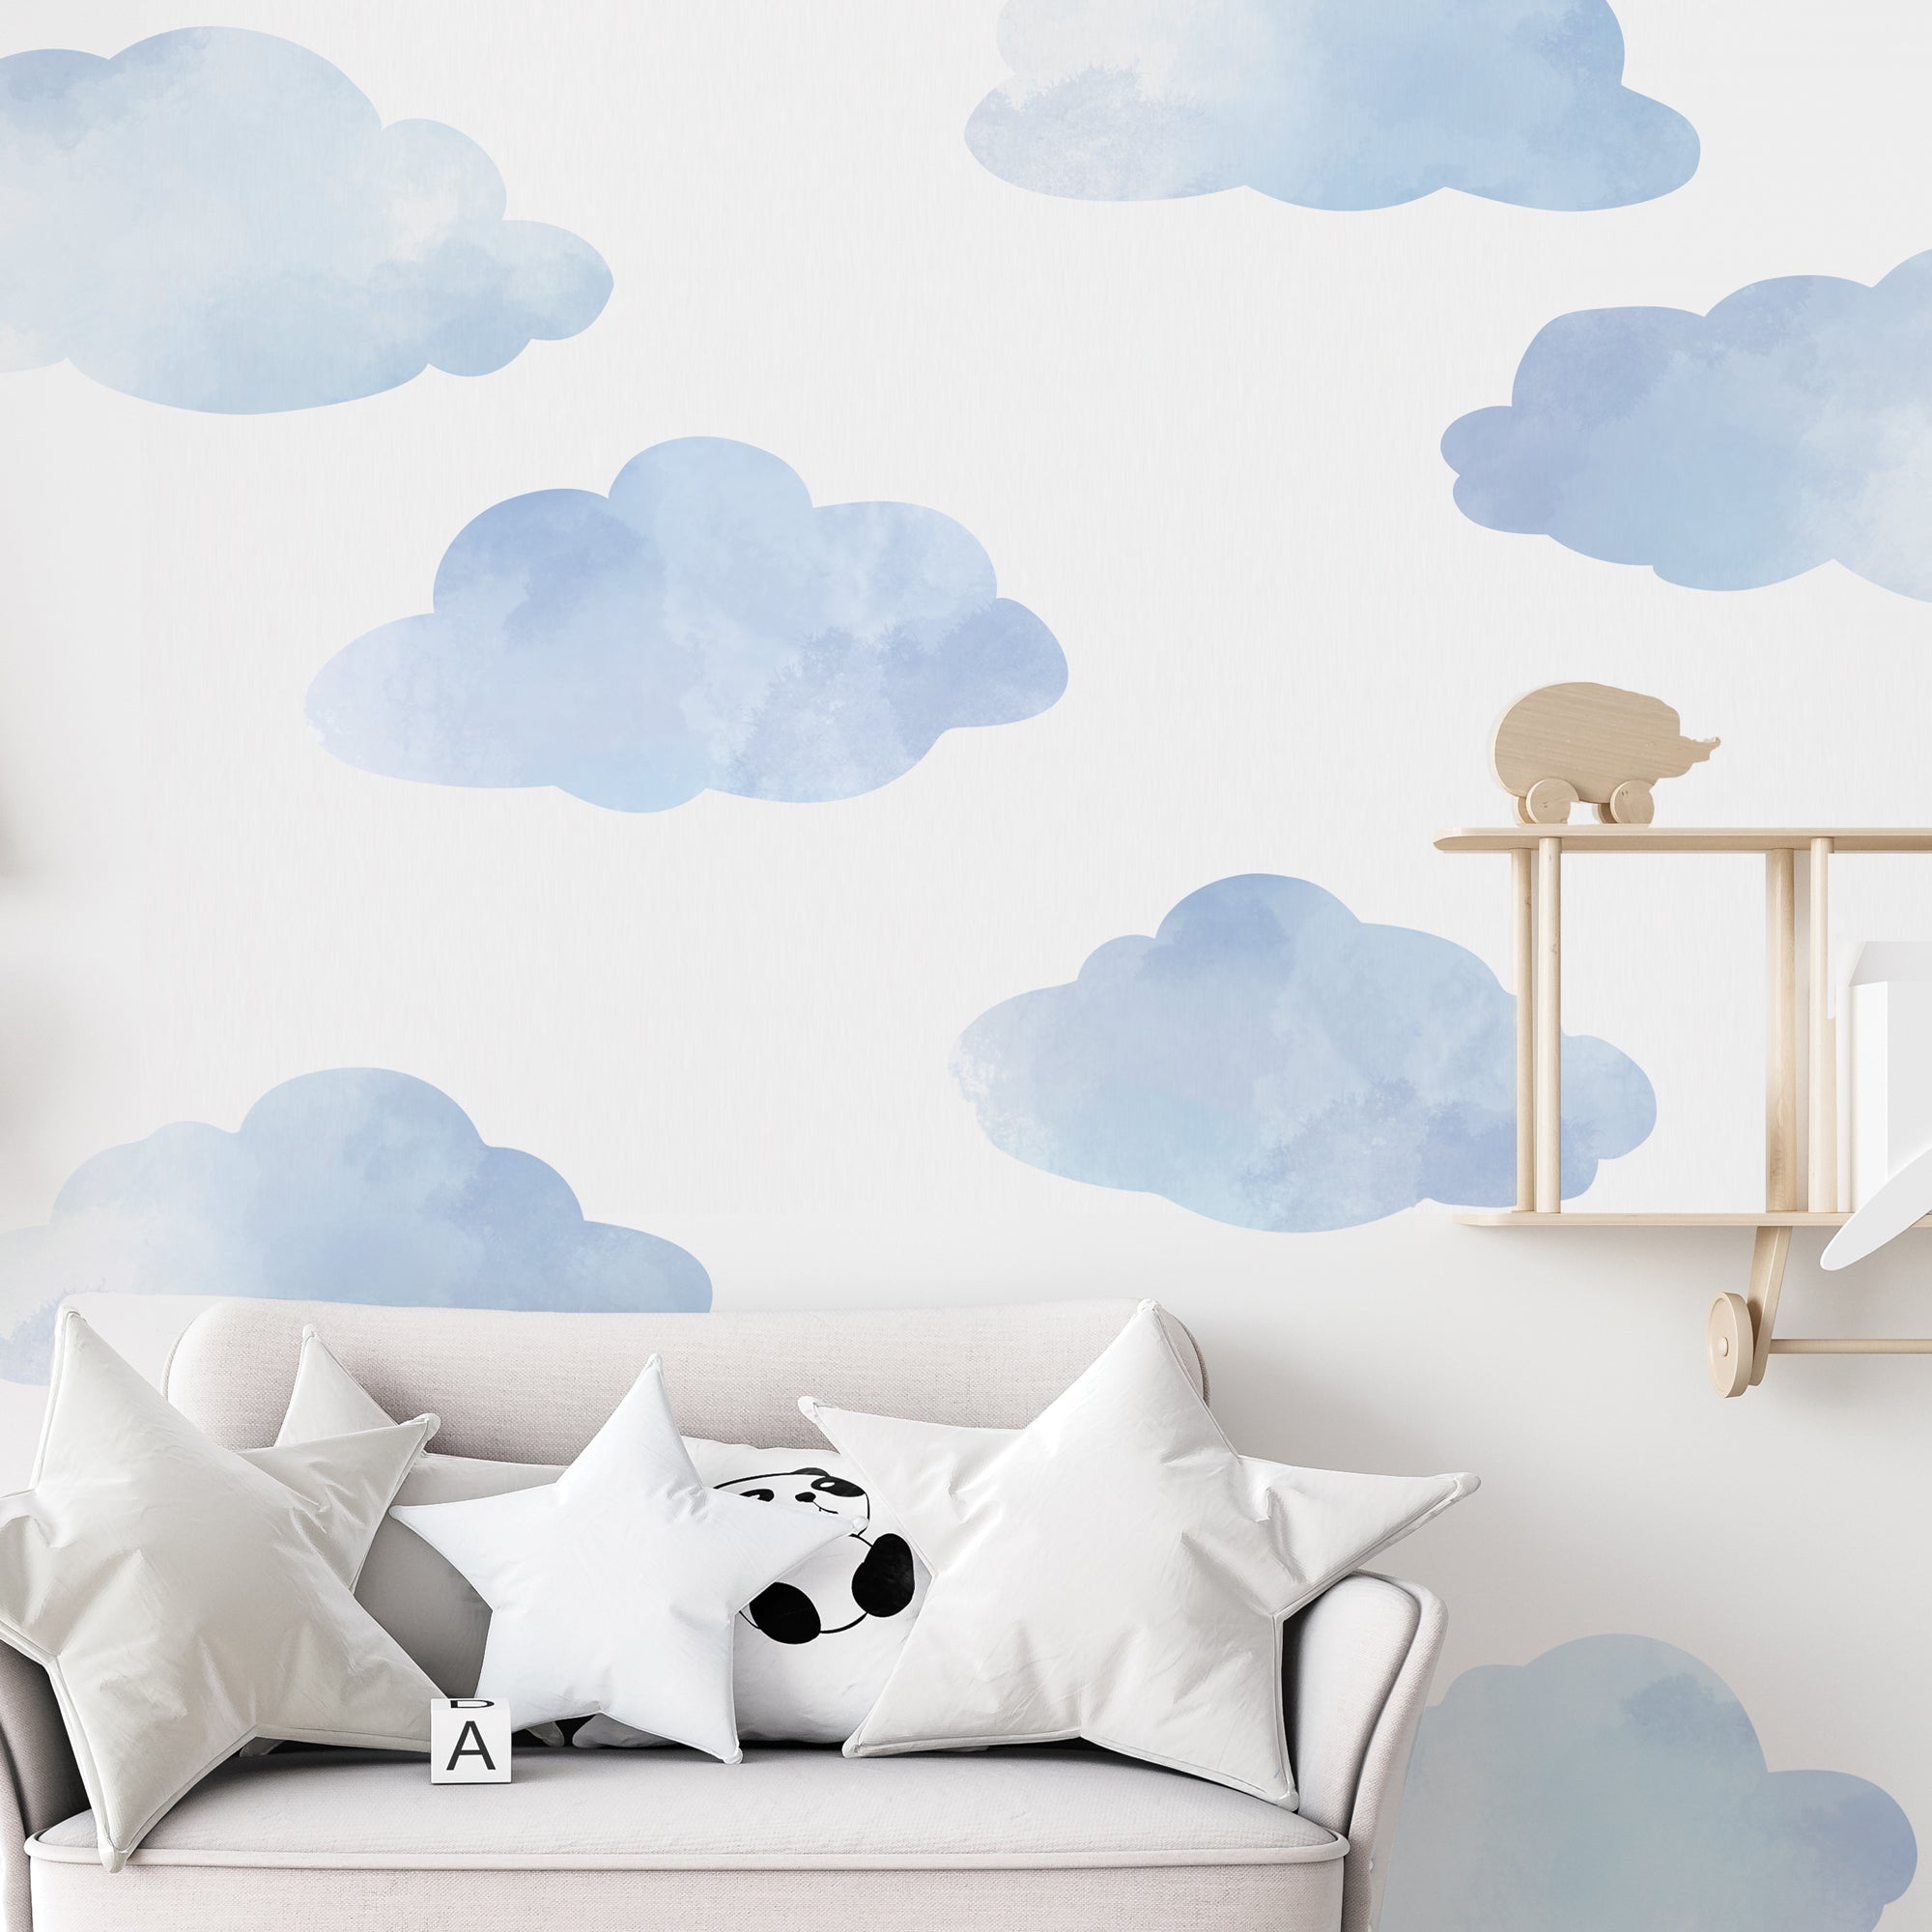 25 Cute Ways of Decorating Home with Wall Decor Stickers |  PrintMePoster.com Blog